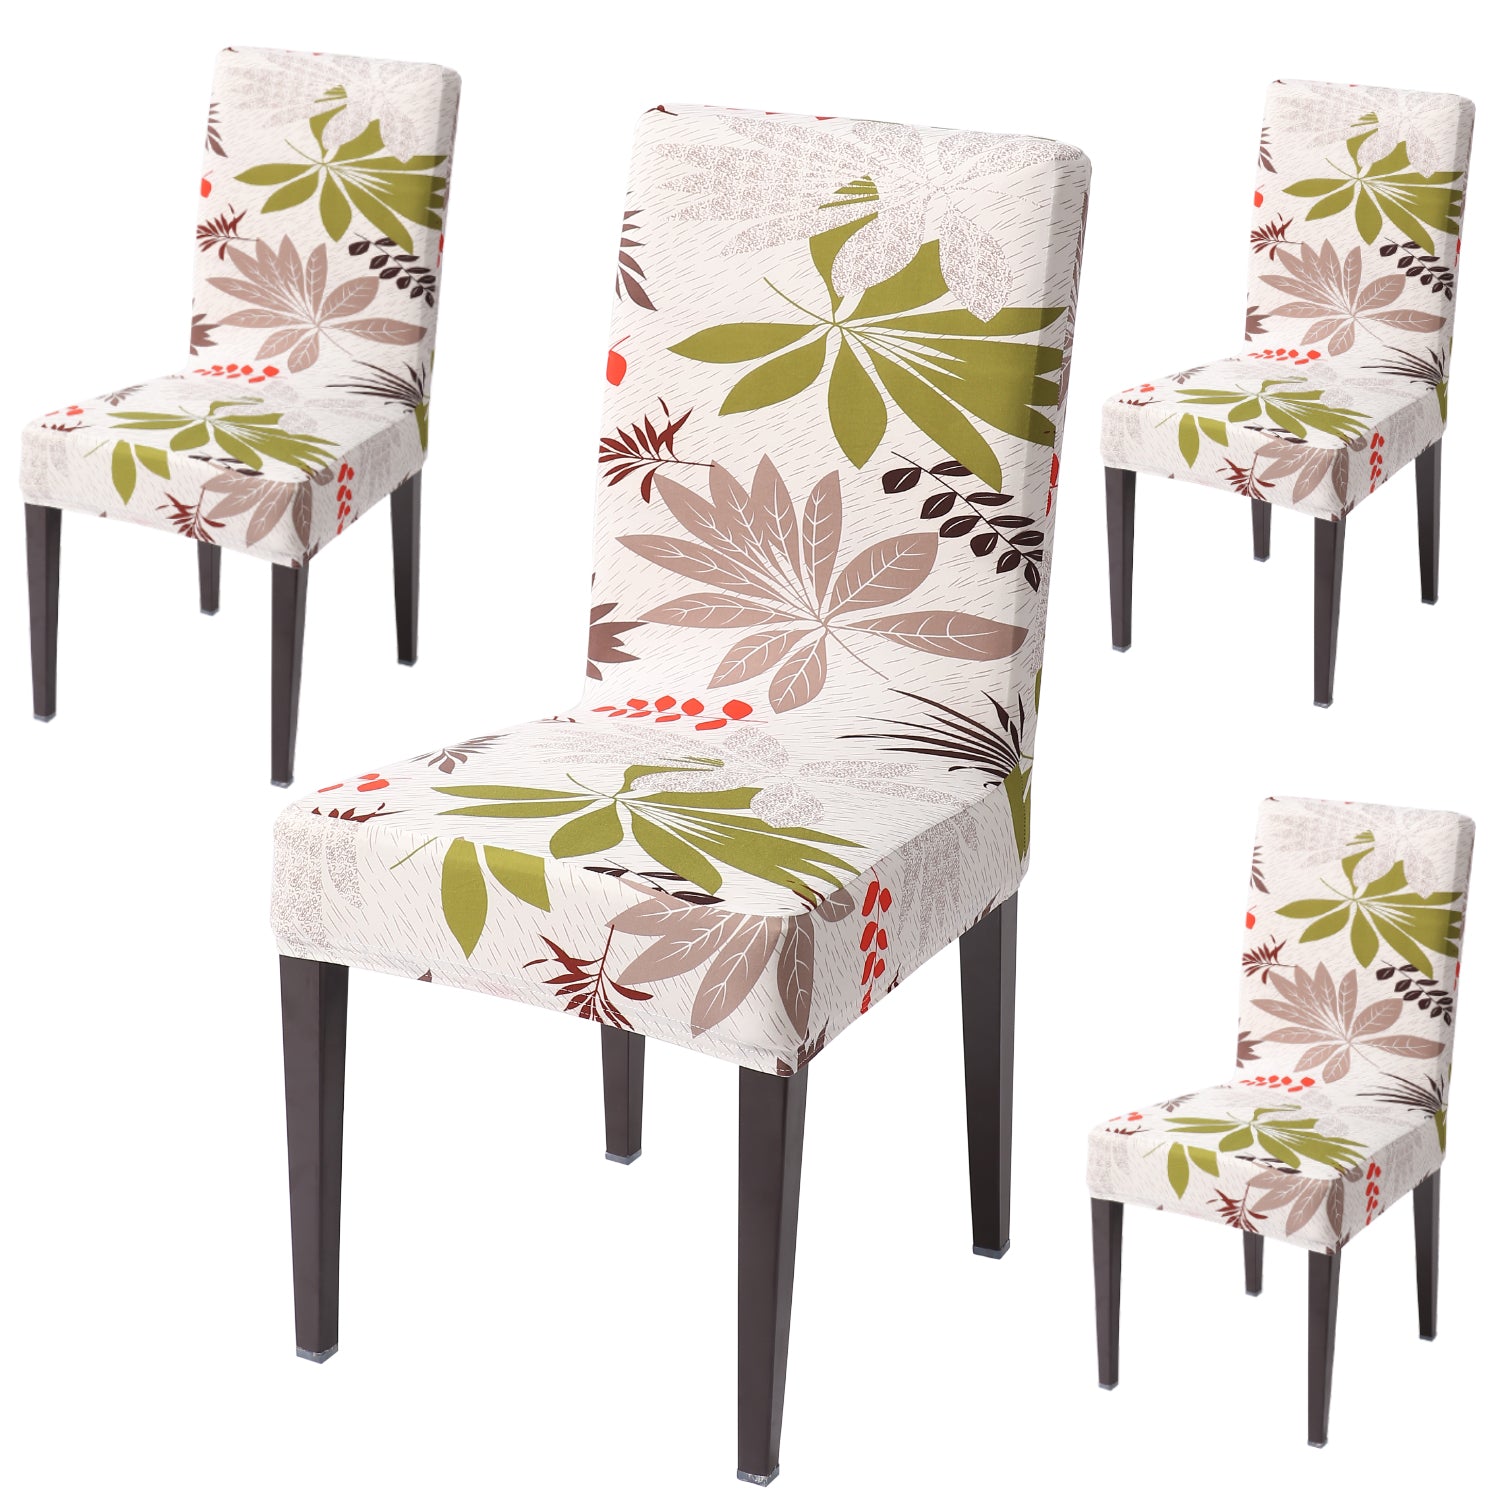 Elastic Stretchable Dining Chair Cover, Ivory Colorful Leaves